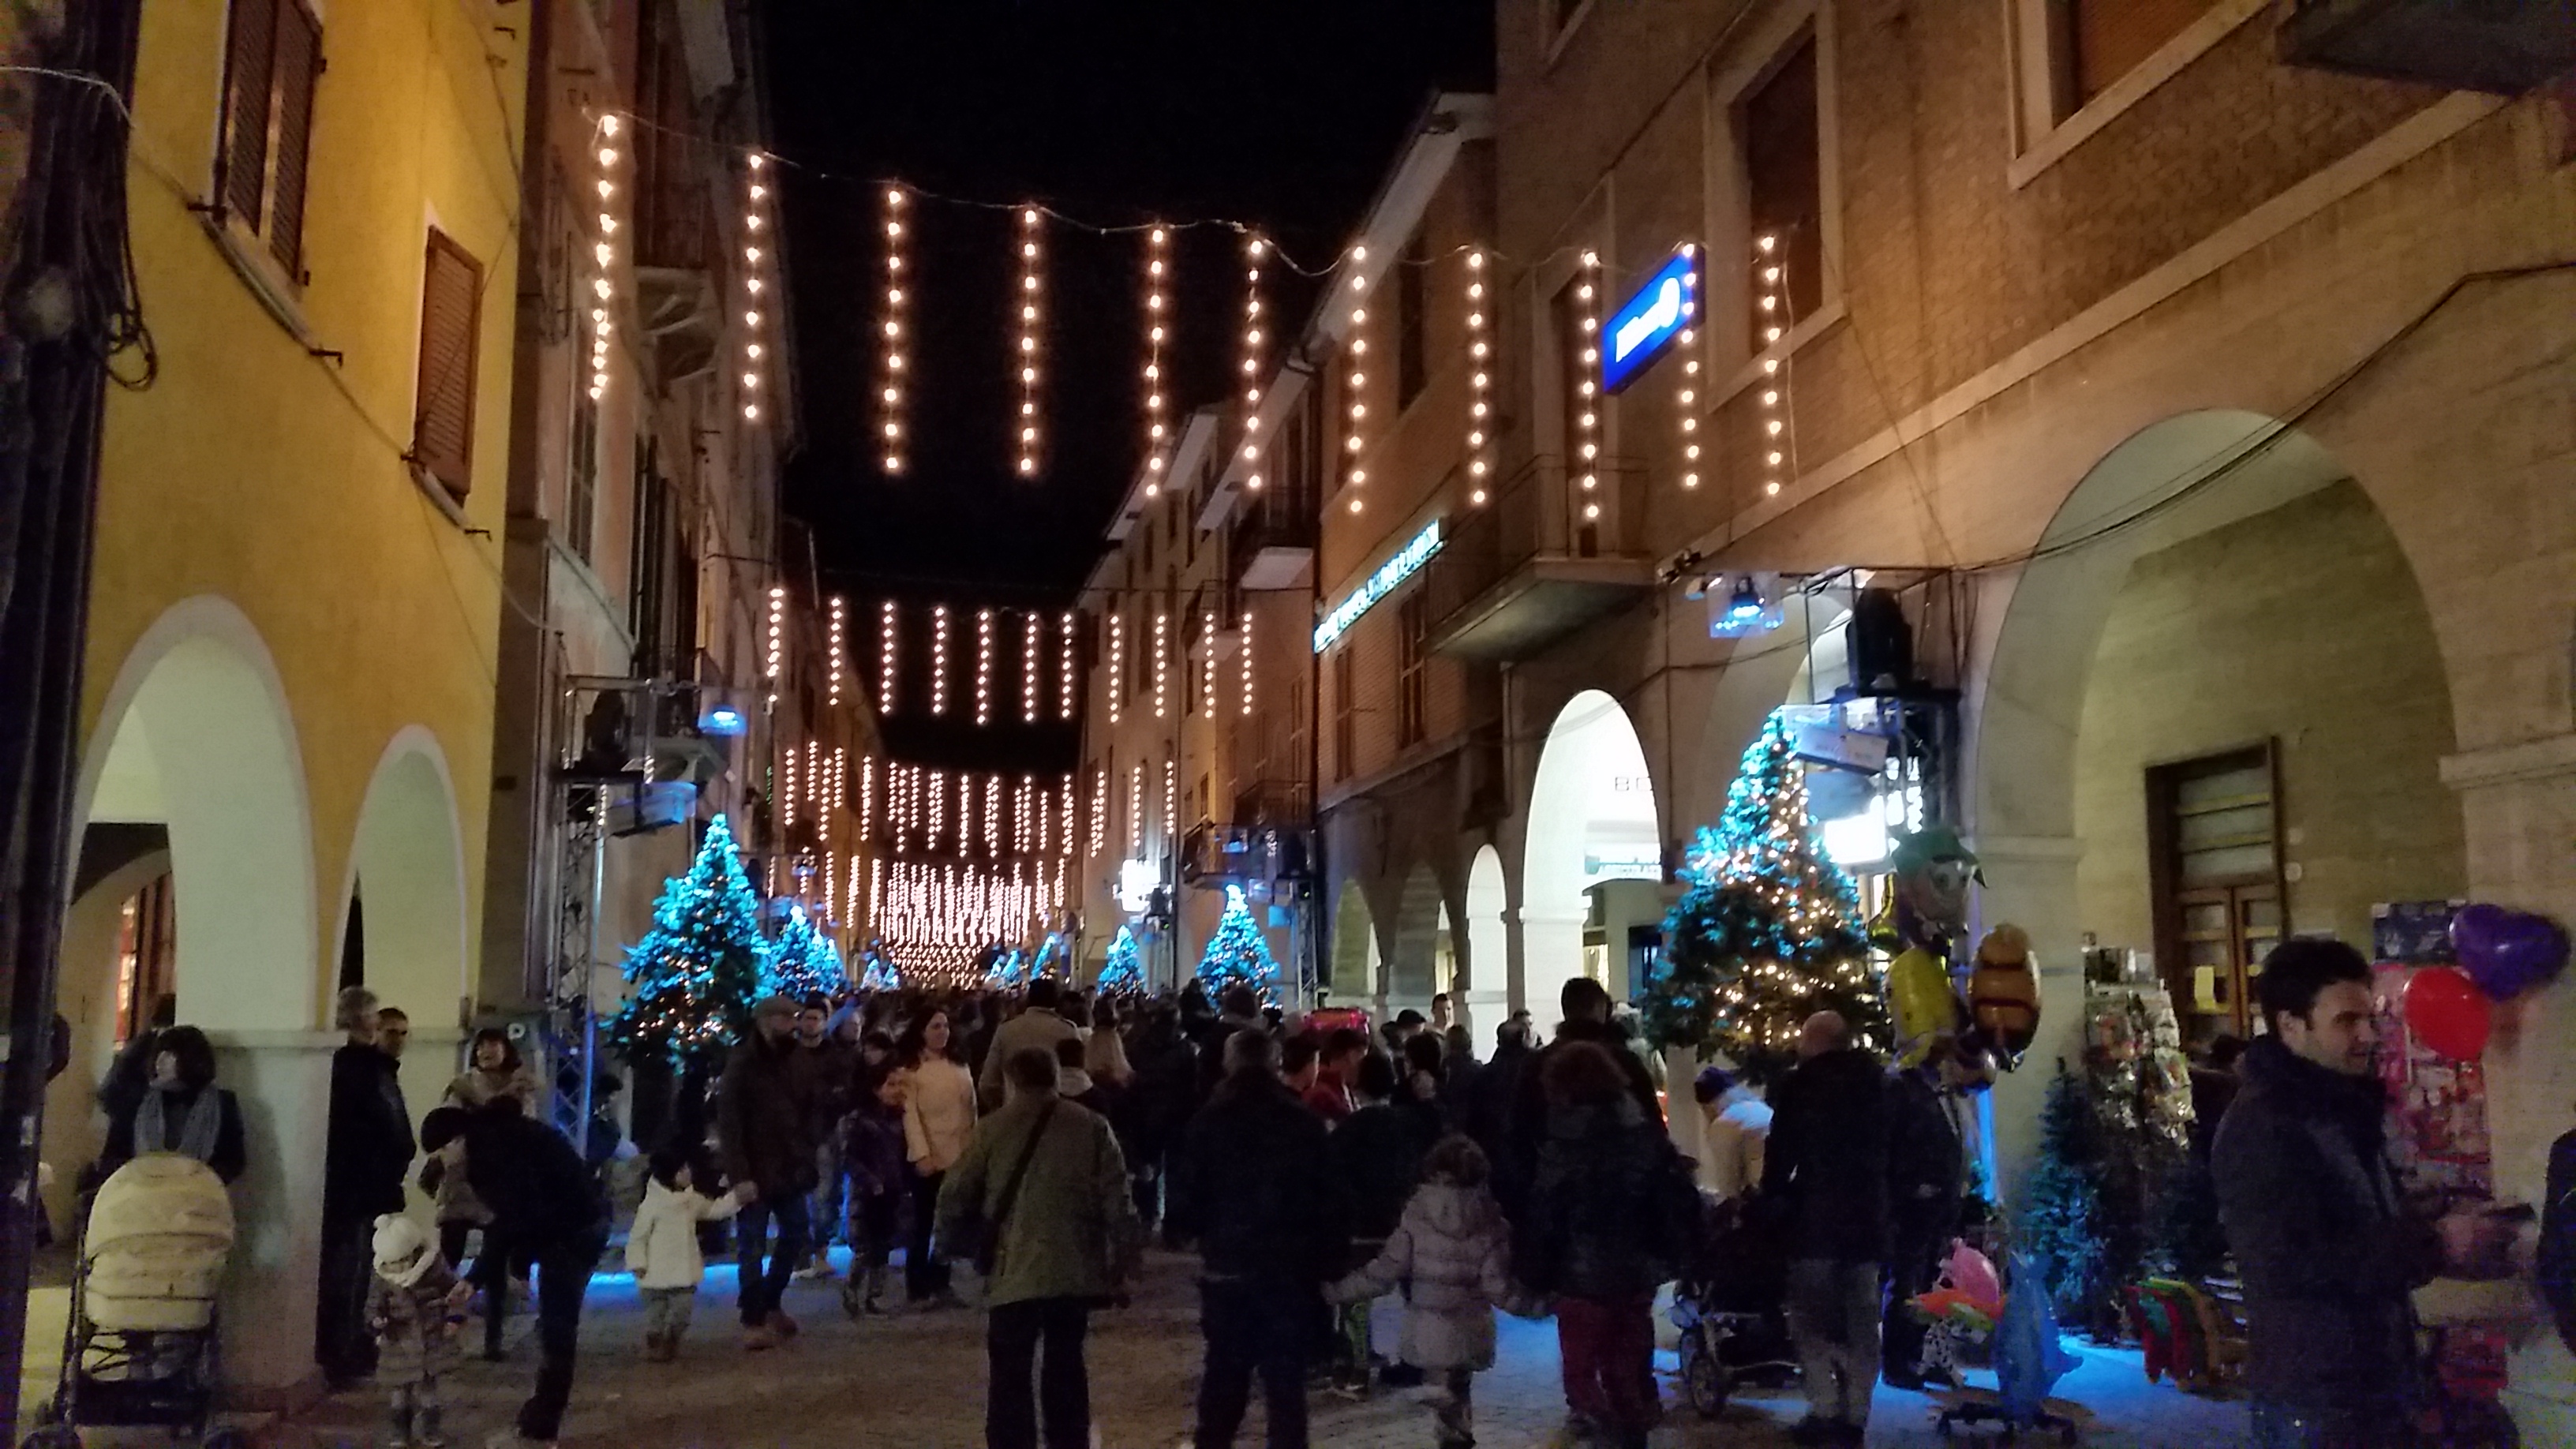 Natale a Fossombrone 